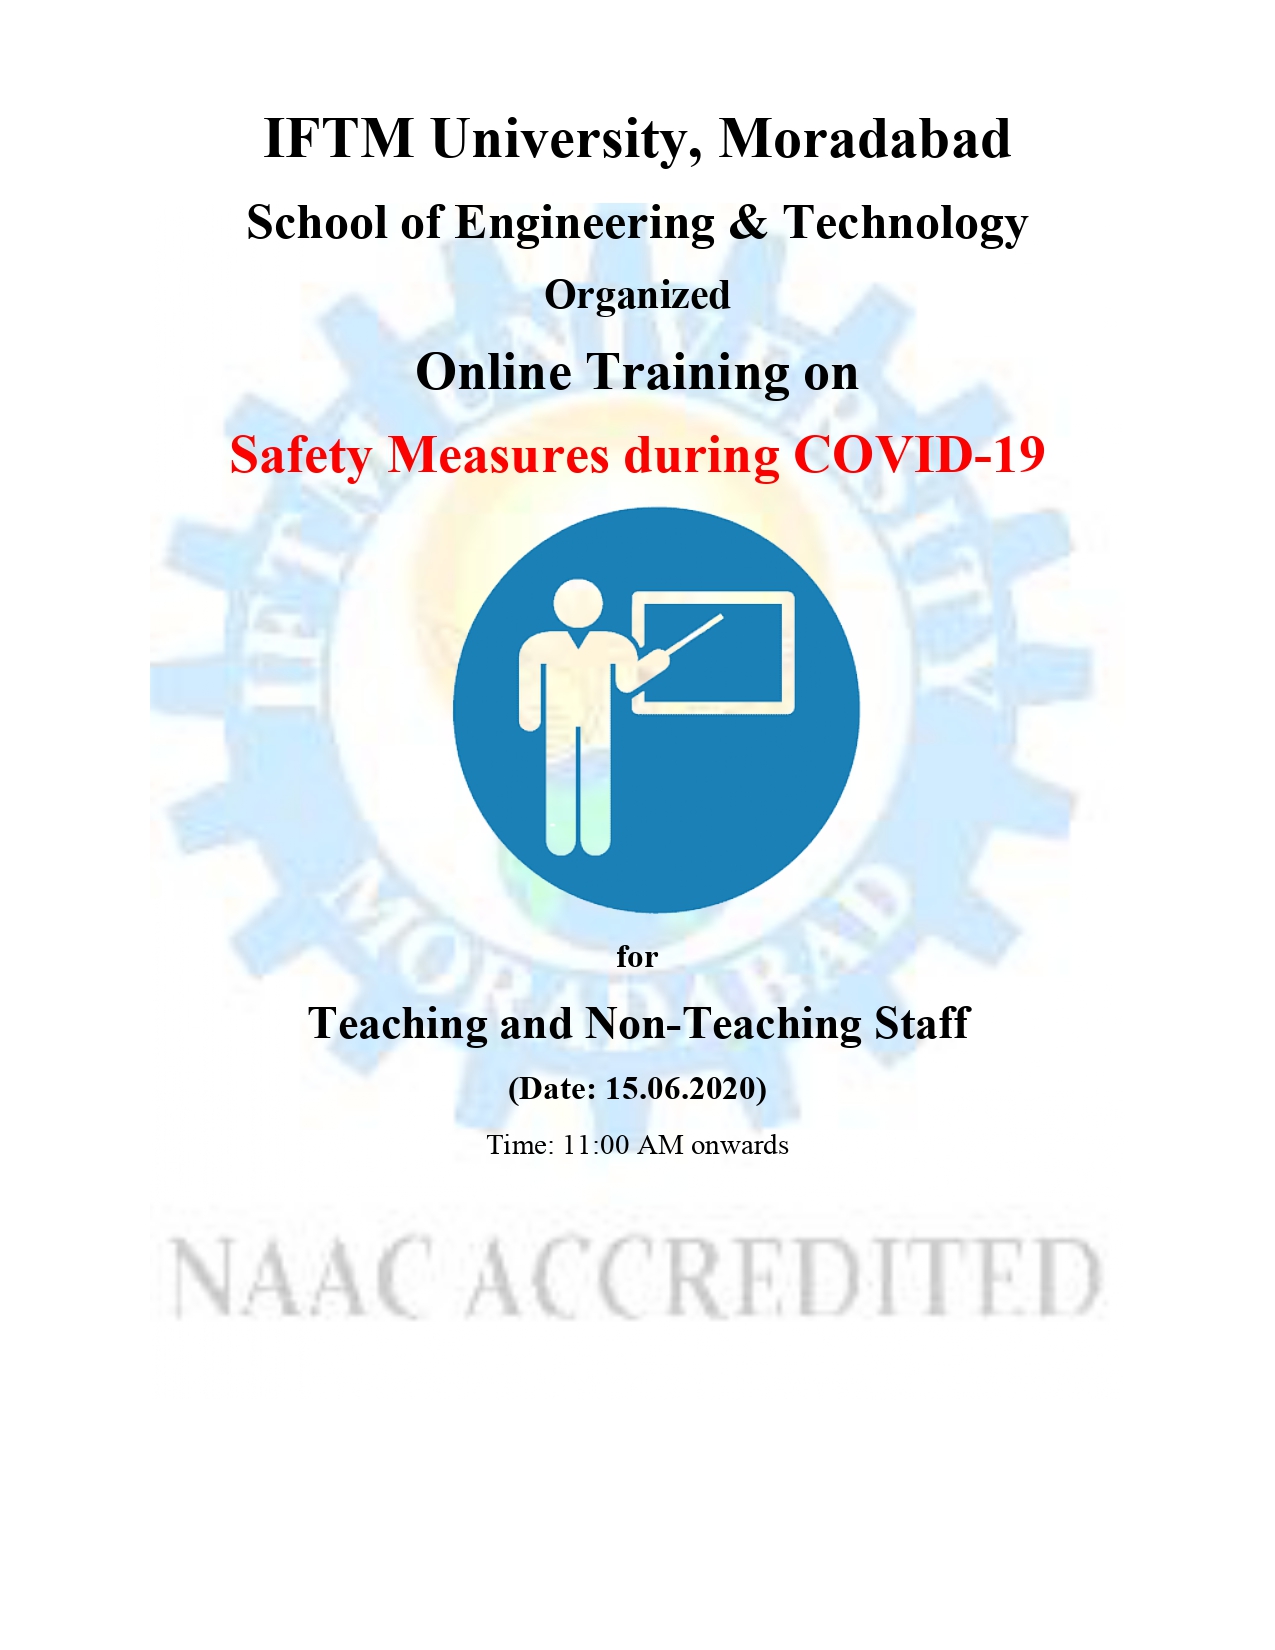 Online Training on Safety measures during COVID19